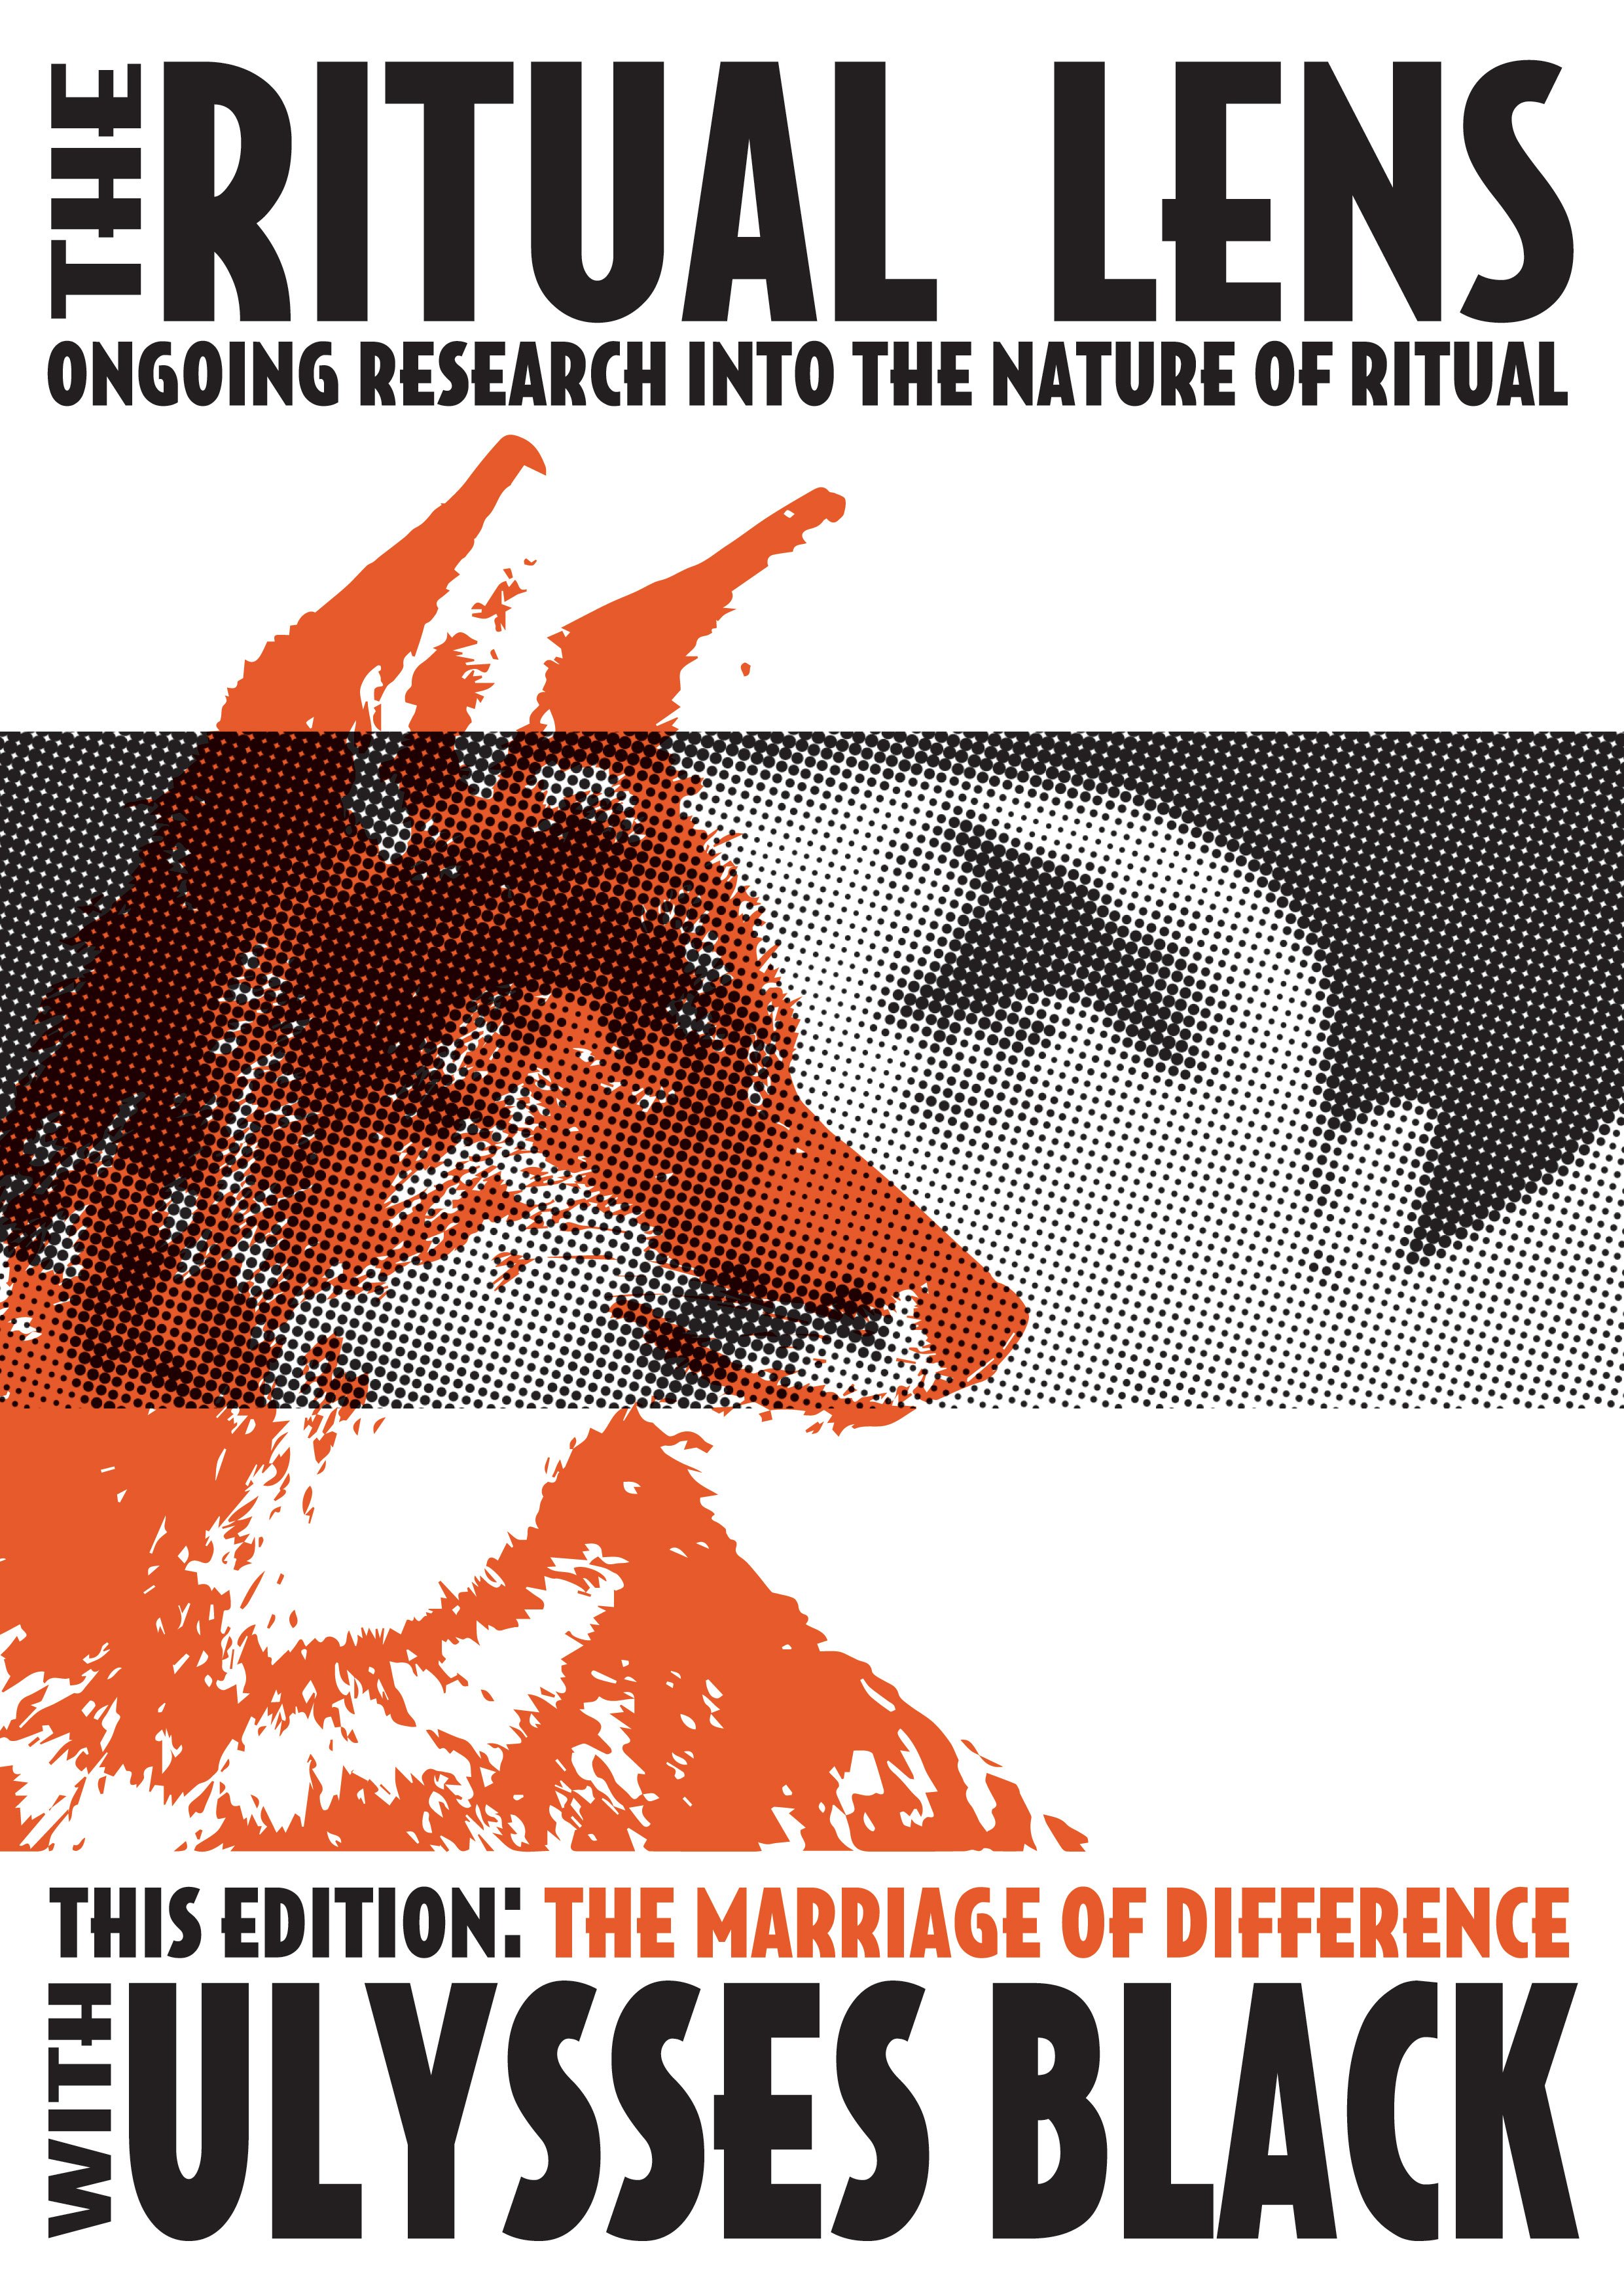 2019: The Ritual Lens: Marriage of Difference